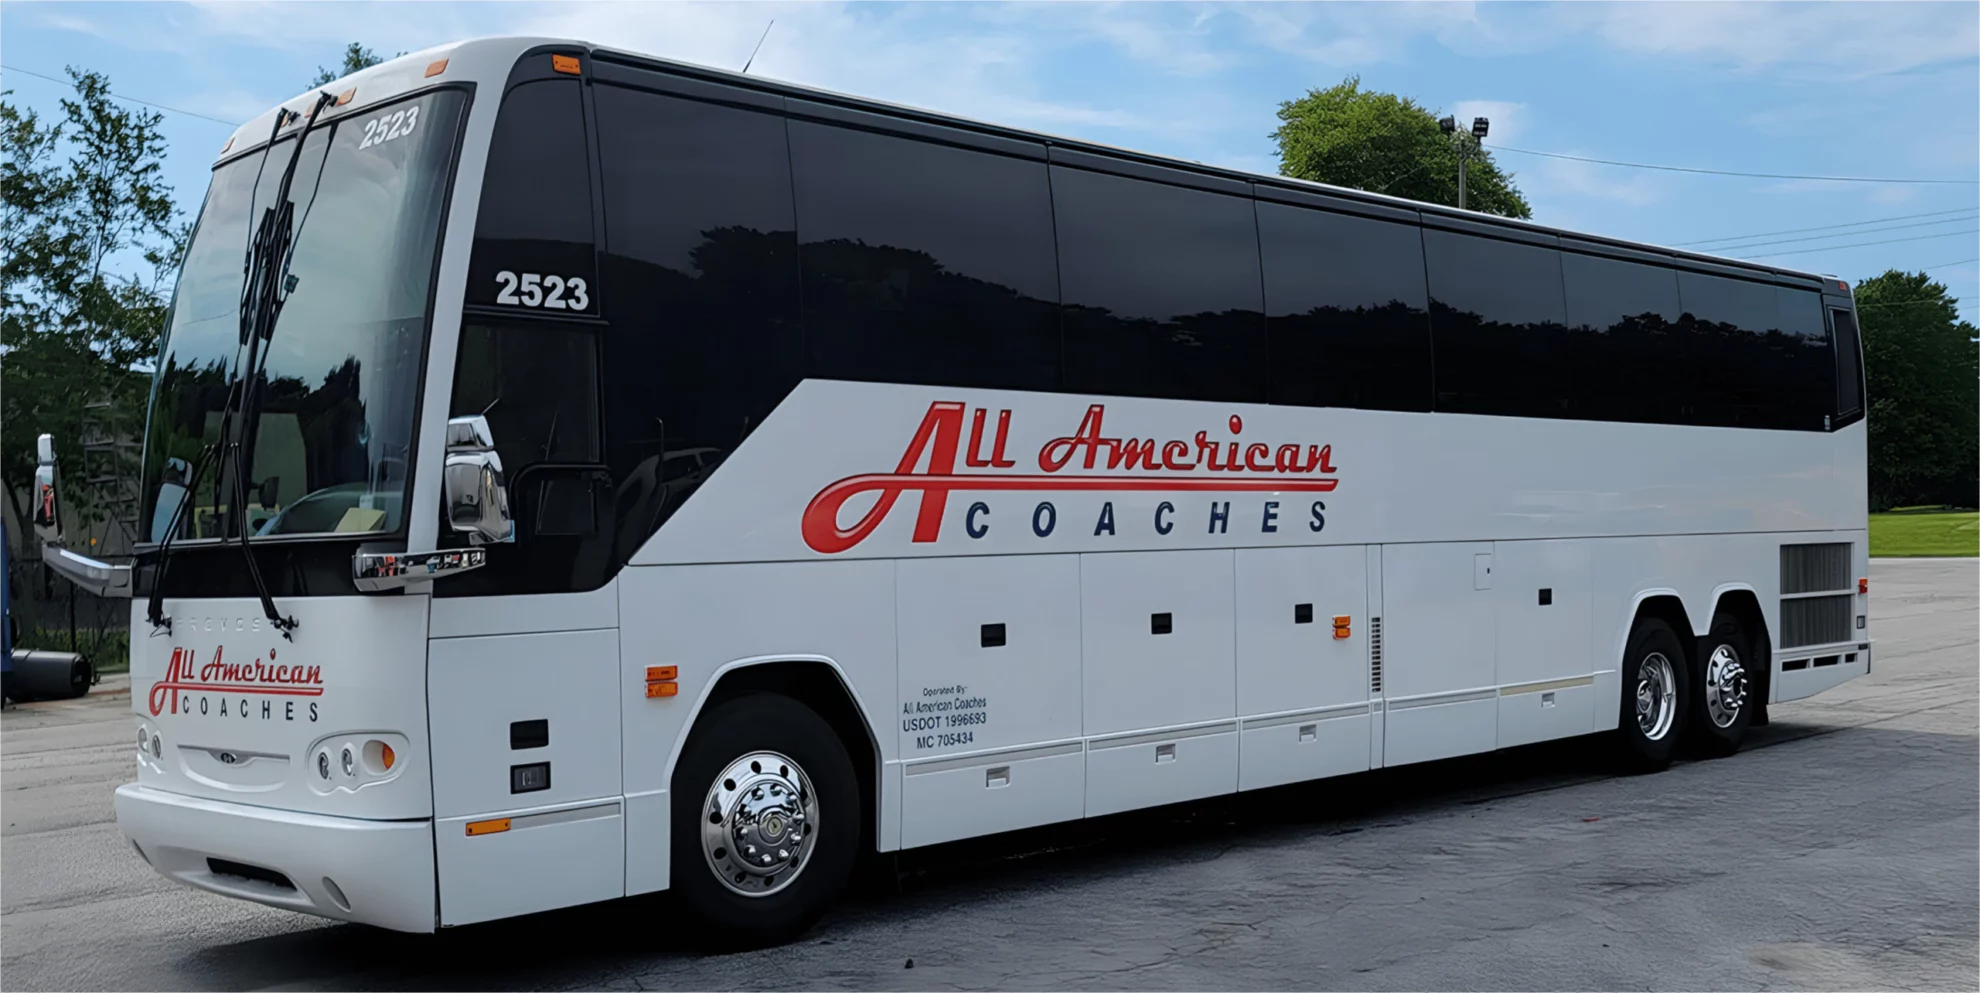 a view of the all american coaches bus opt